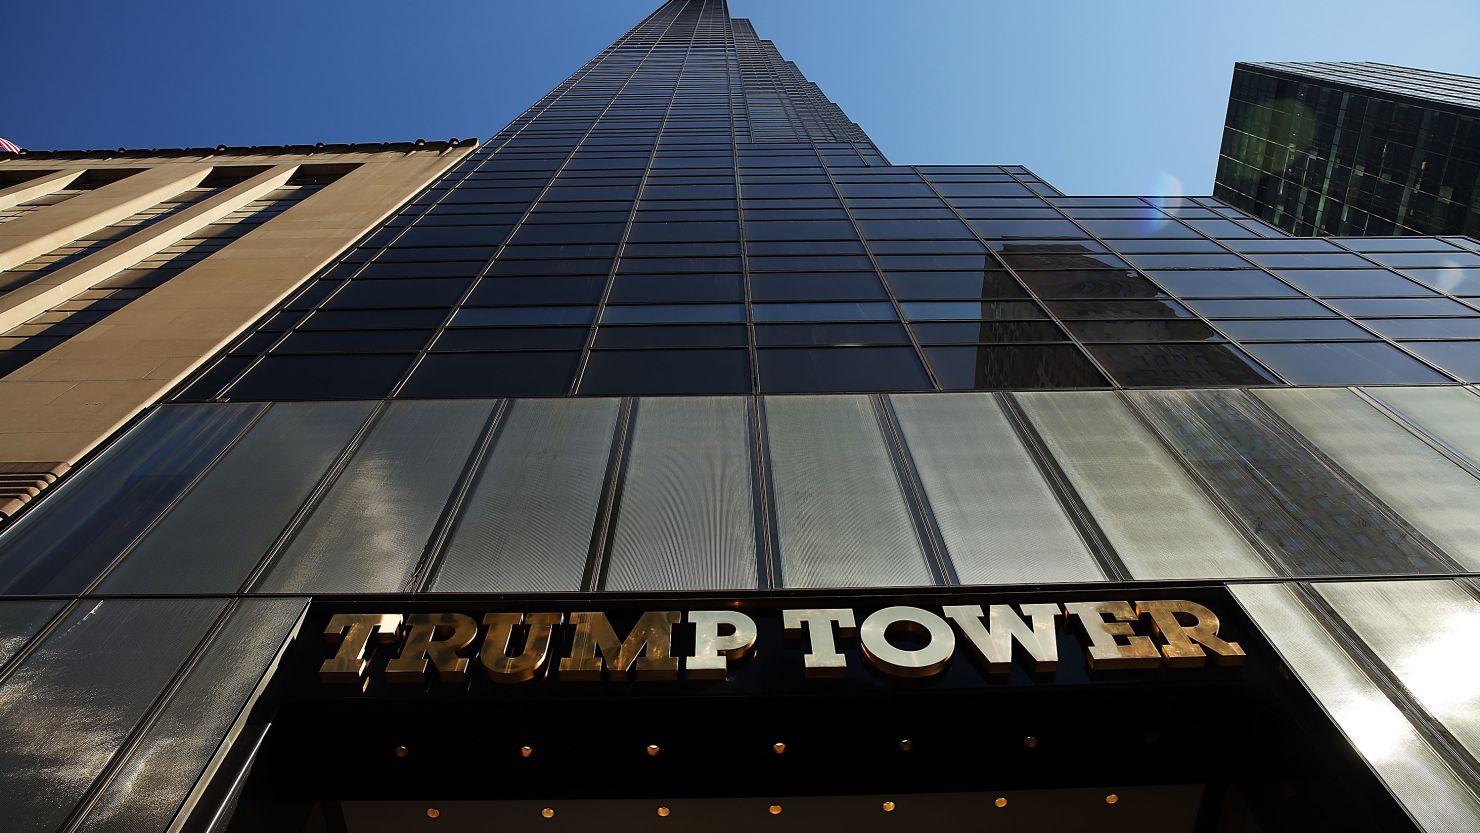 Trump Tower stands along 5th Avenue in Manhattan as police stand guard outside following an earlier protest against Republican presidential candidate Donald Trump in front of the building on March 12, 2016 in New York City. 